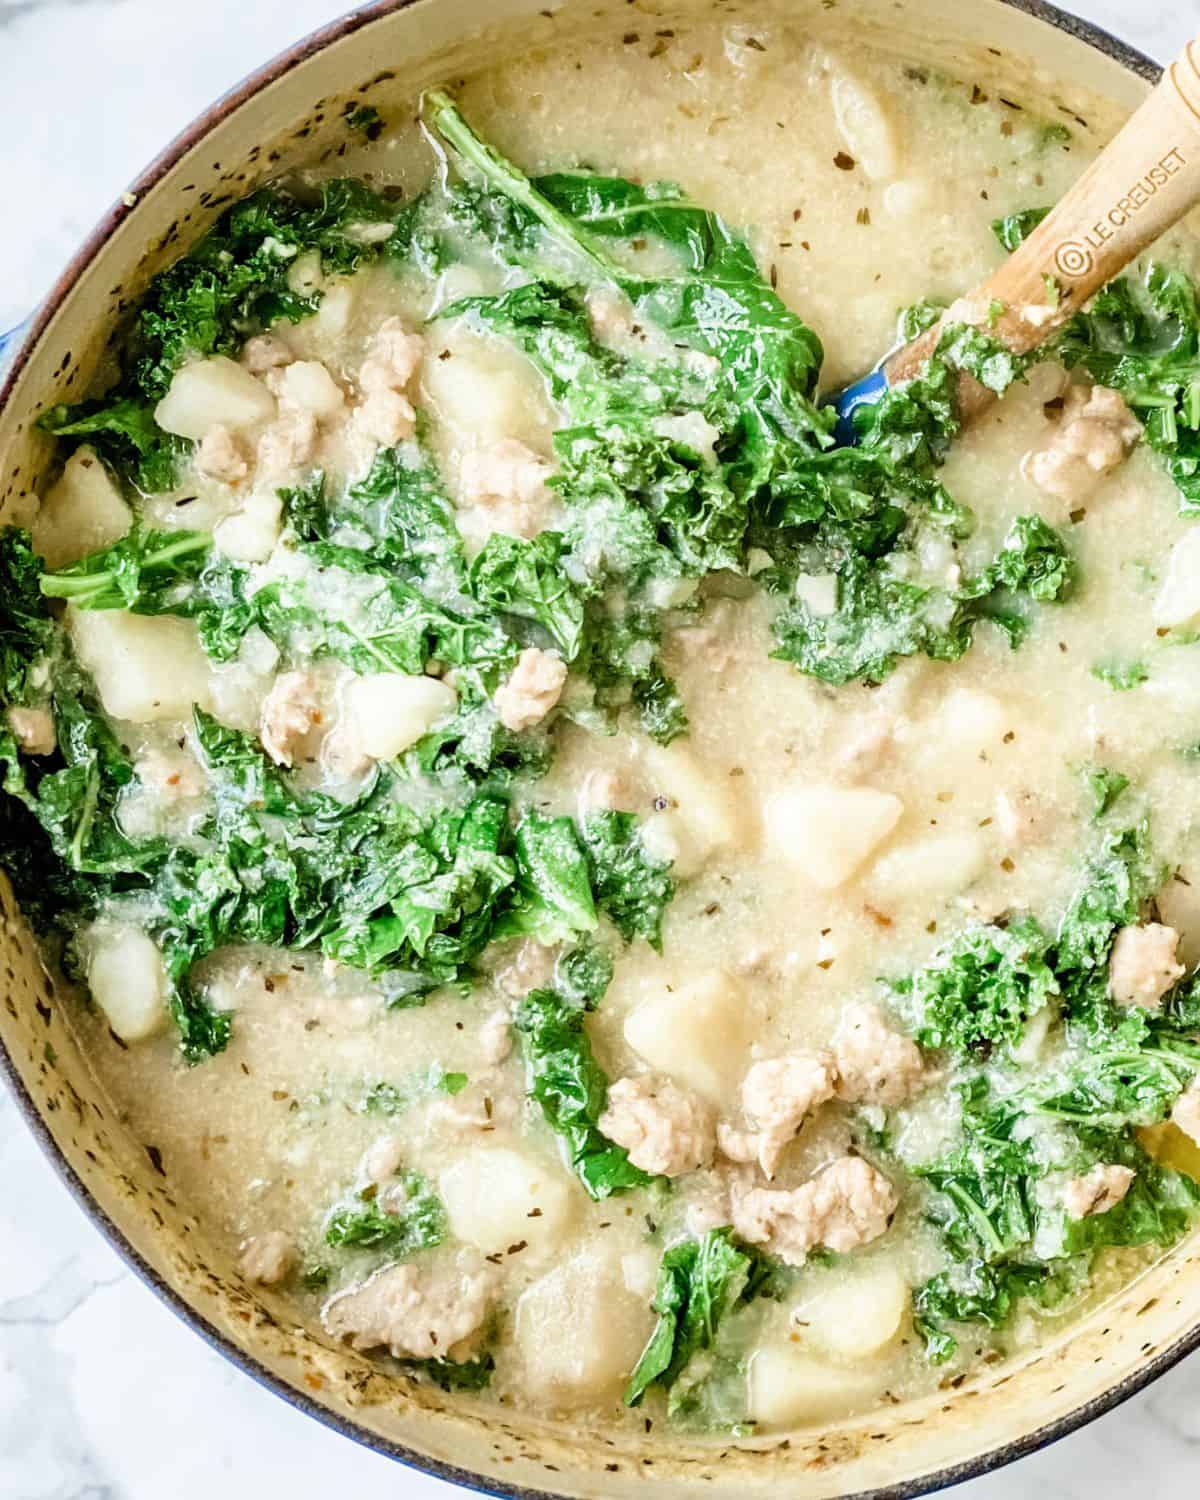 kale cooked down into the zuppa toscana.